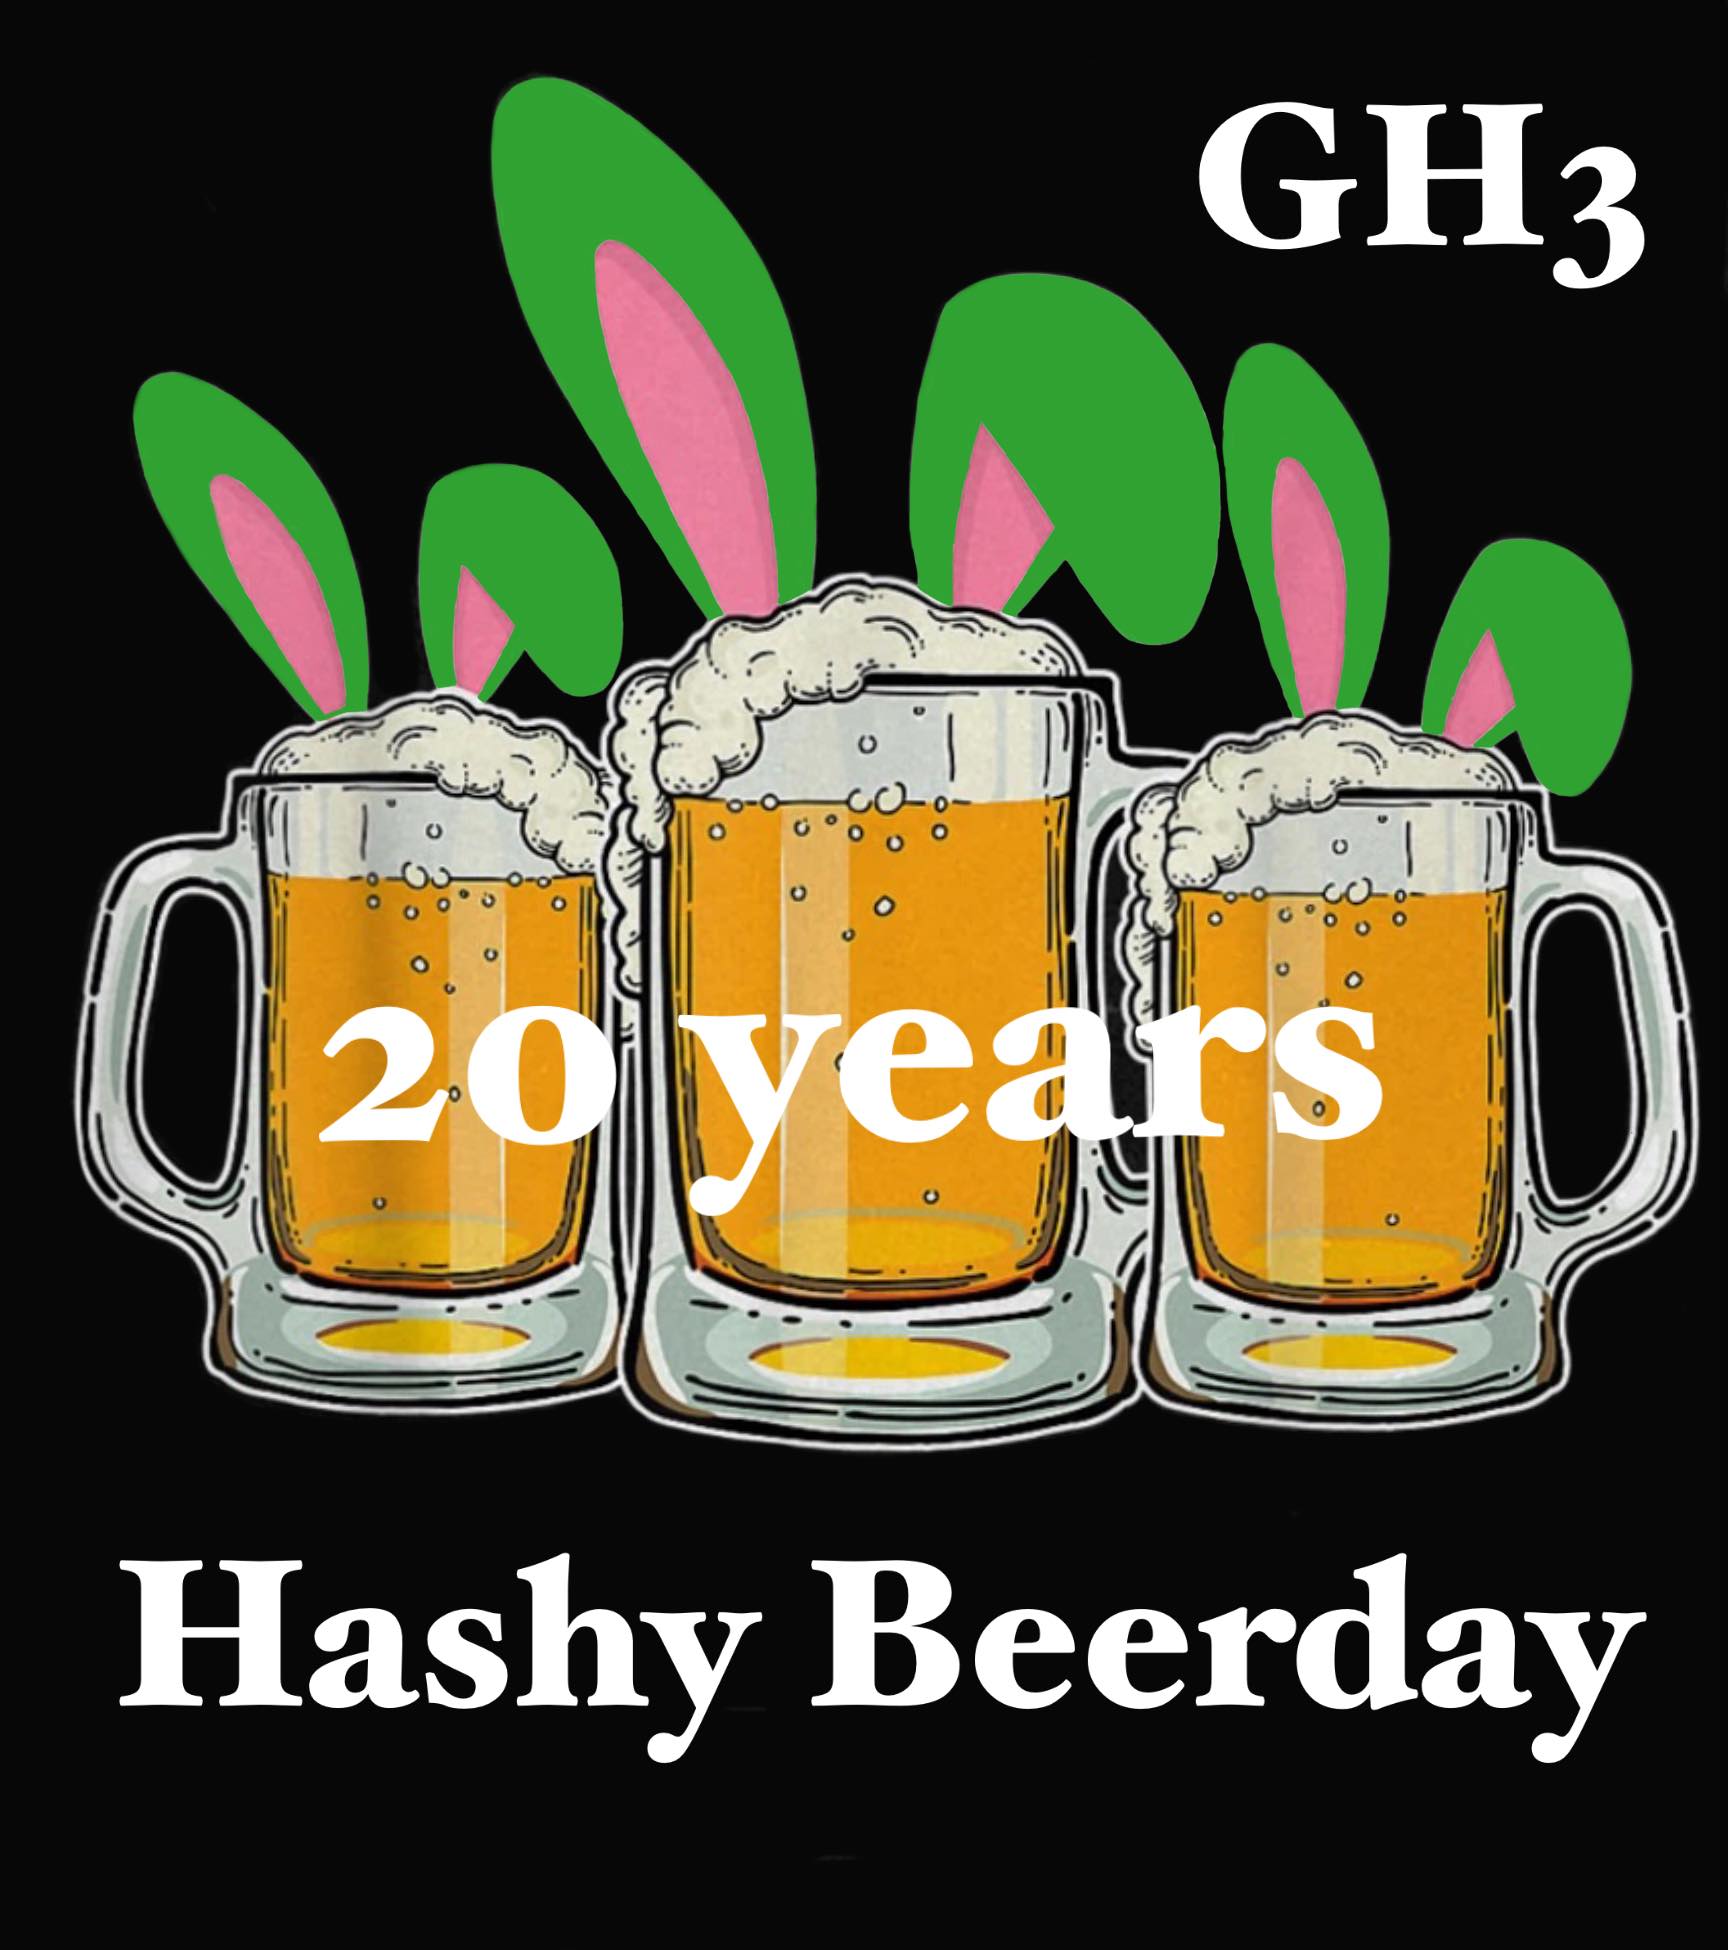 May be an image of beer and text that says "GH3 20 20years years Hashy Beerday"